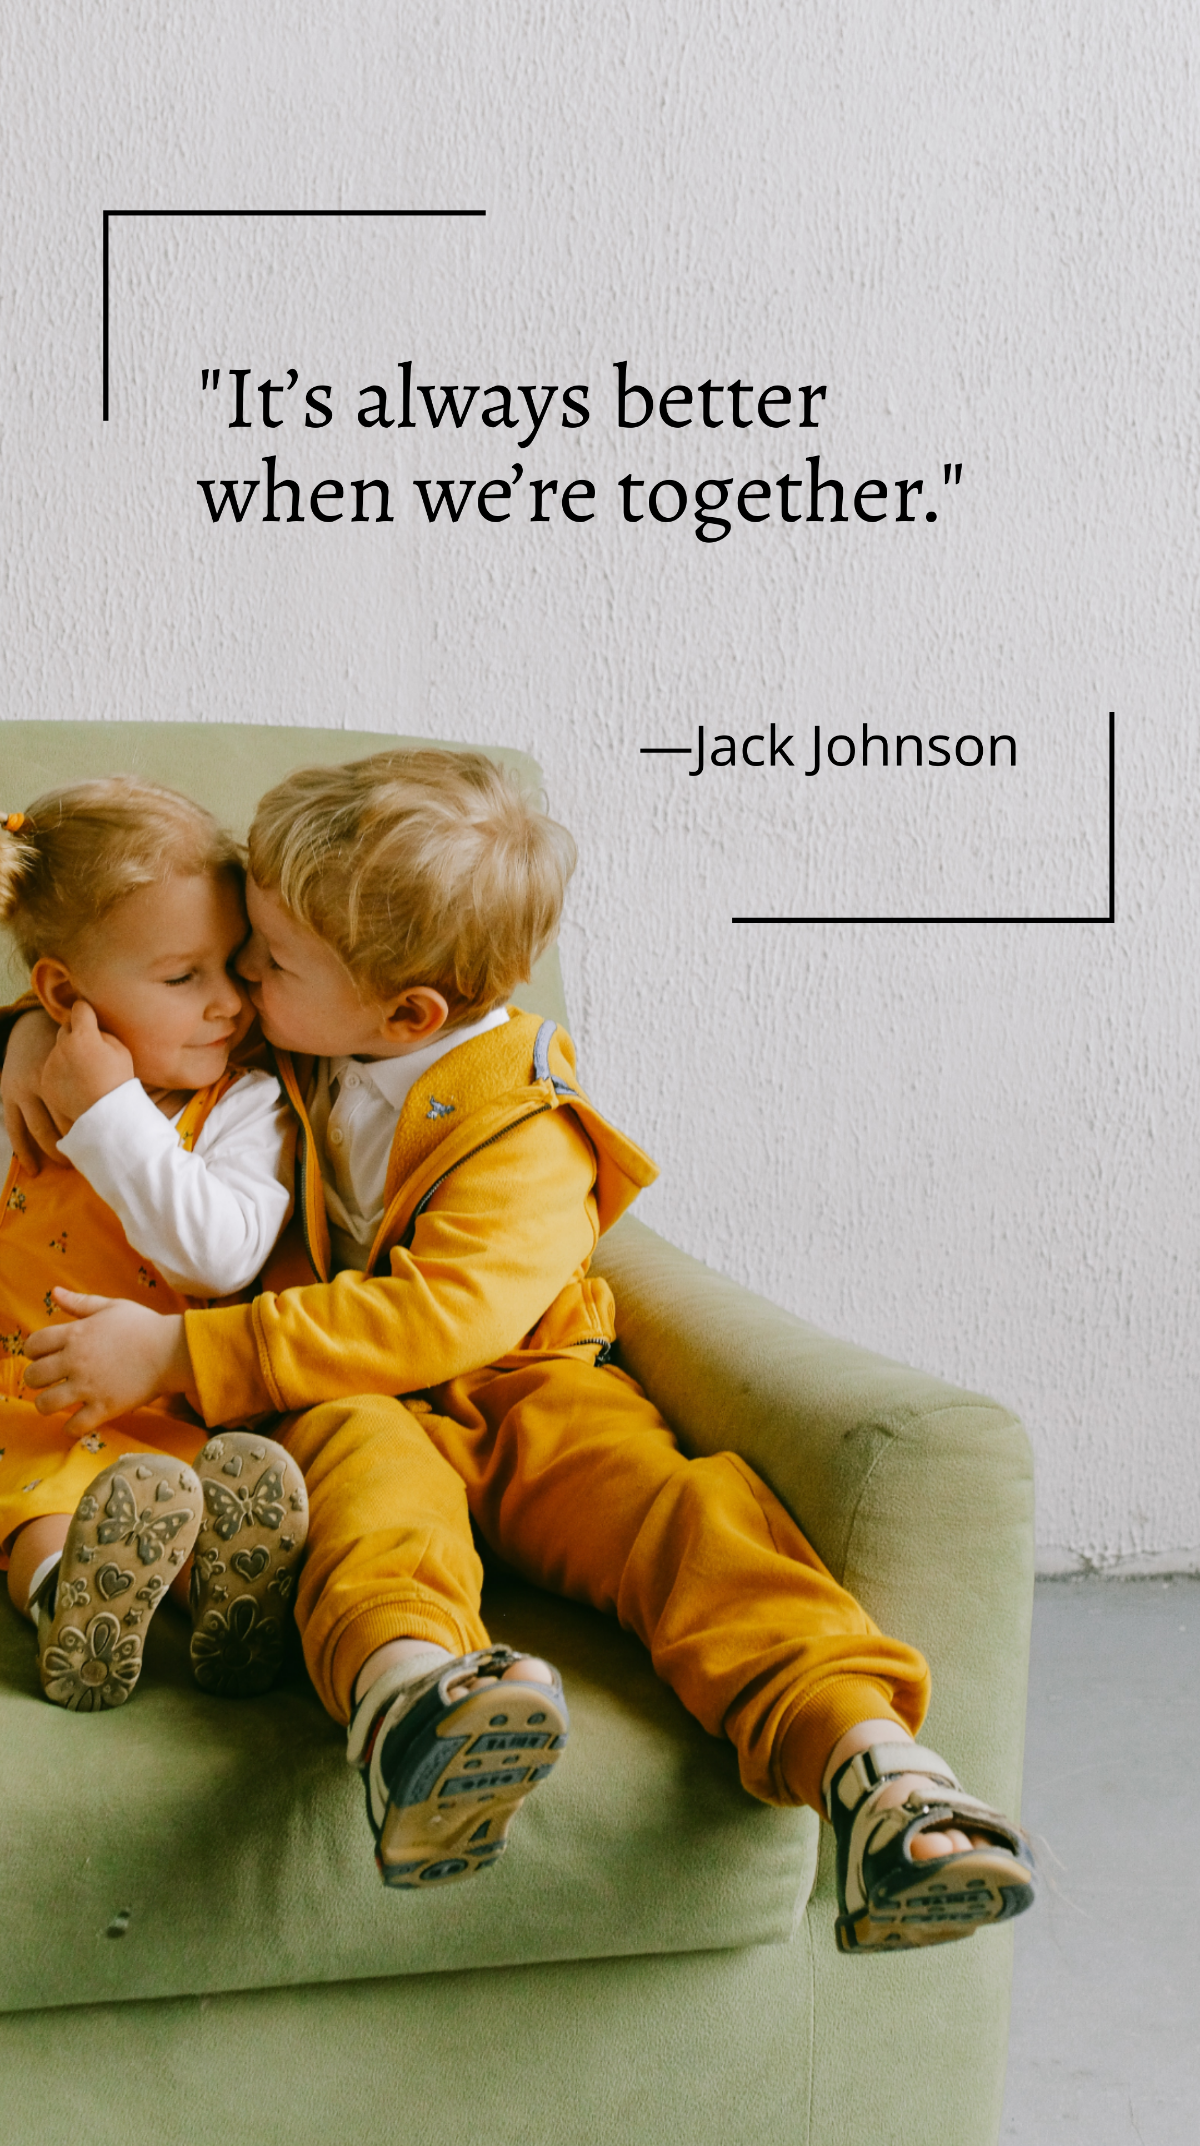 Jack Johnson - “It’s always better when we’re together.”